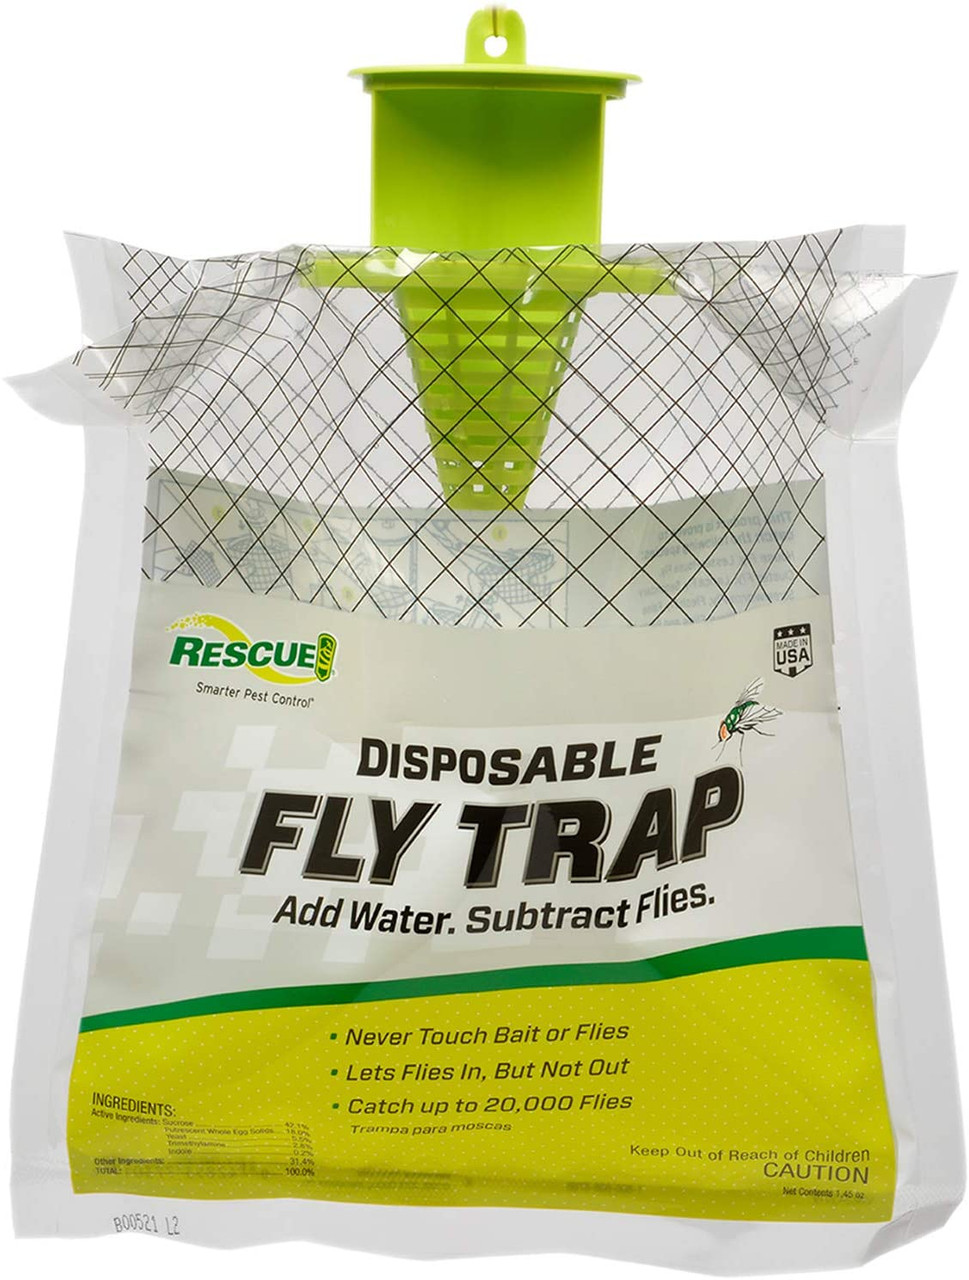 RESCUE! Reusable POP Fly Trap Outdoor Insect Trap in the Insect